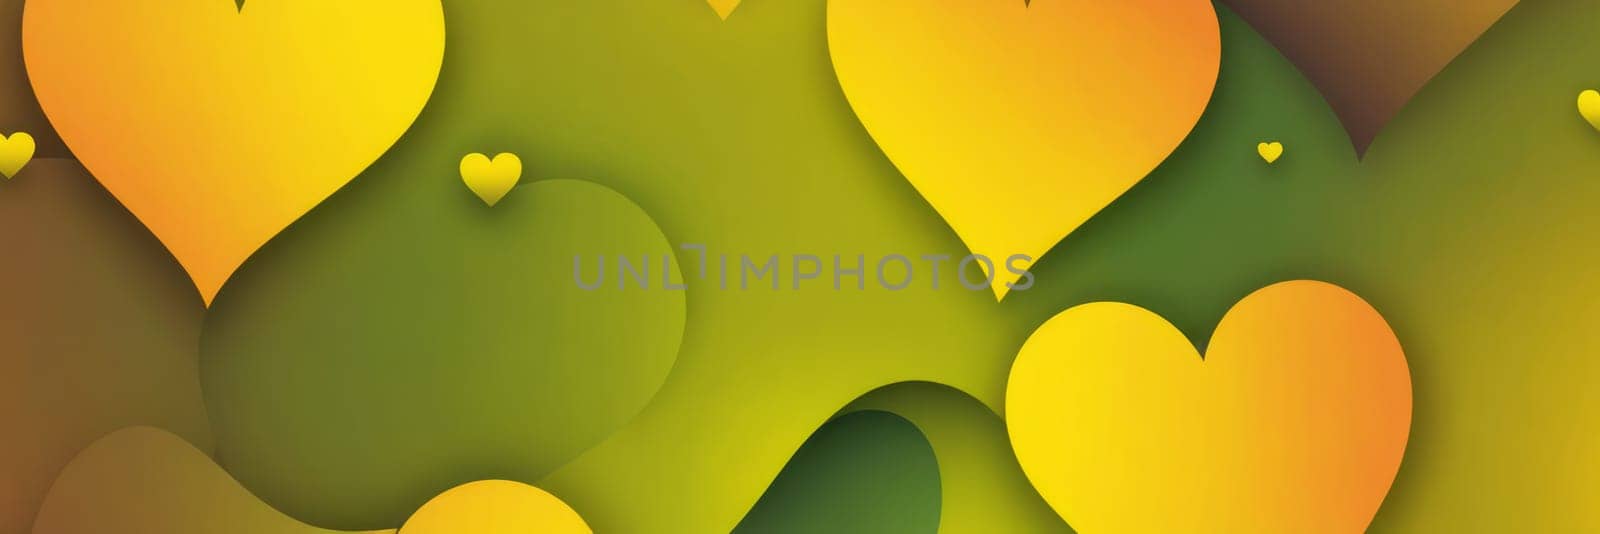 Heart Shapes in Yellow and Olive drab by nkotlyar